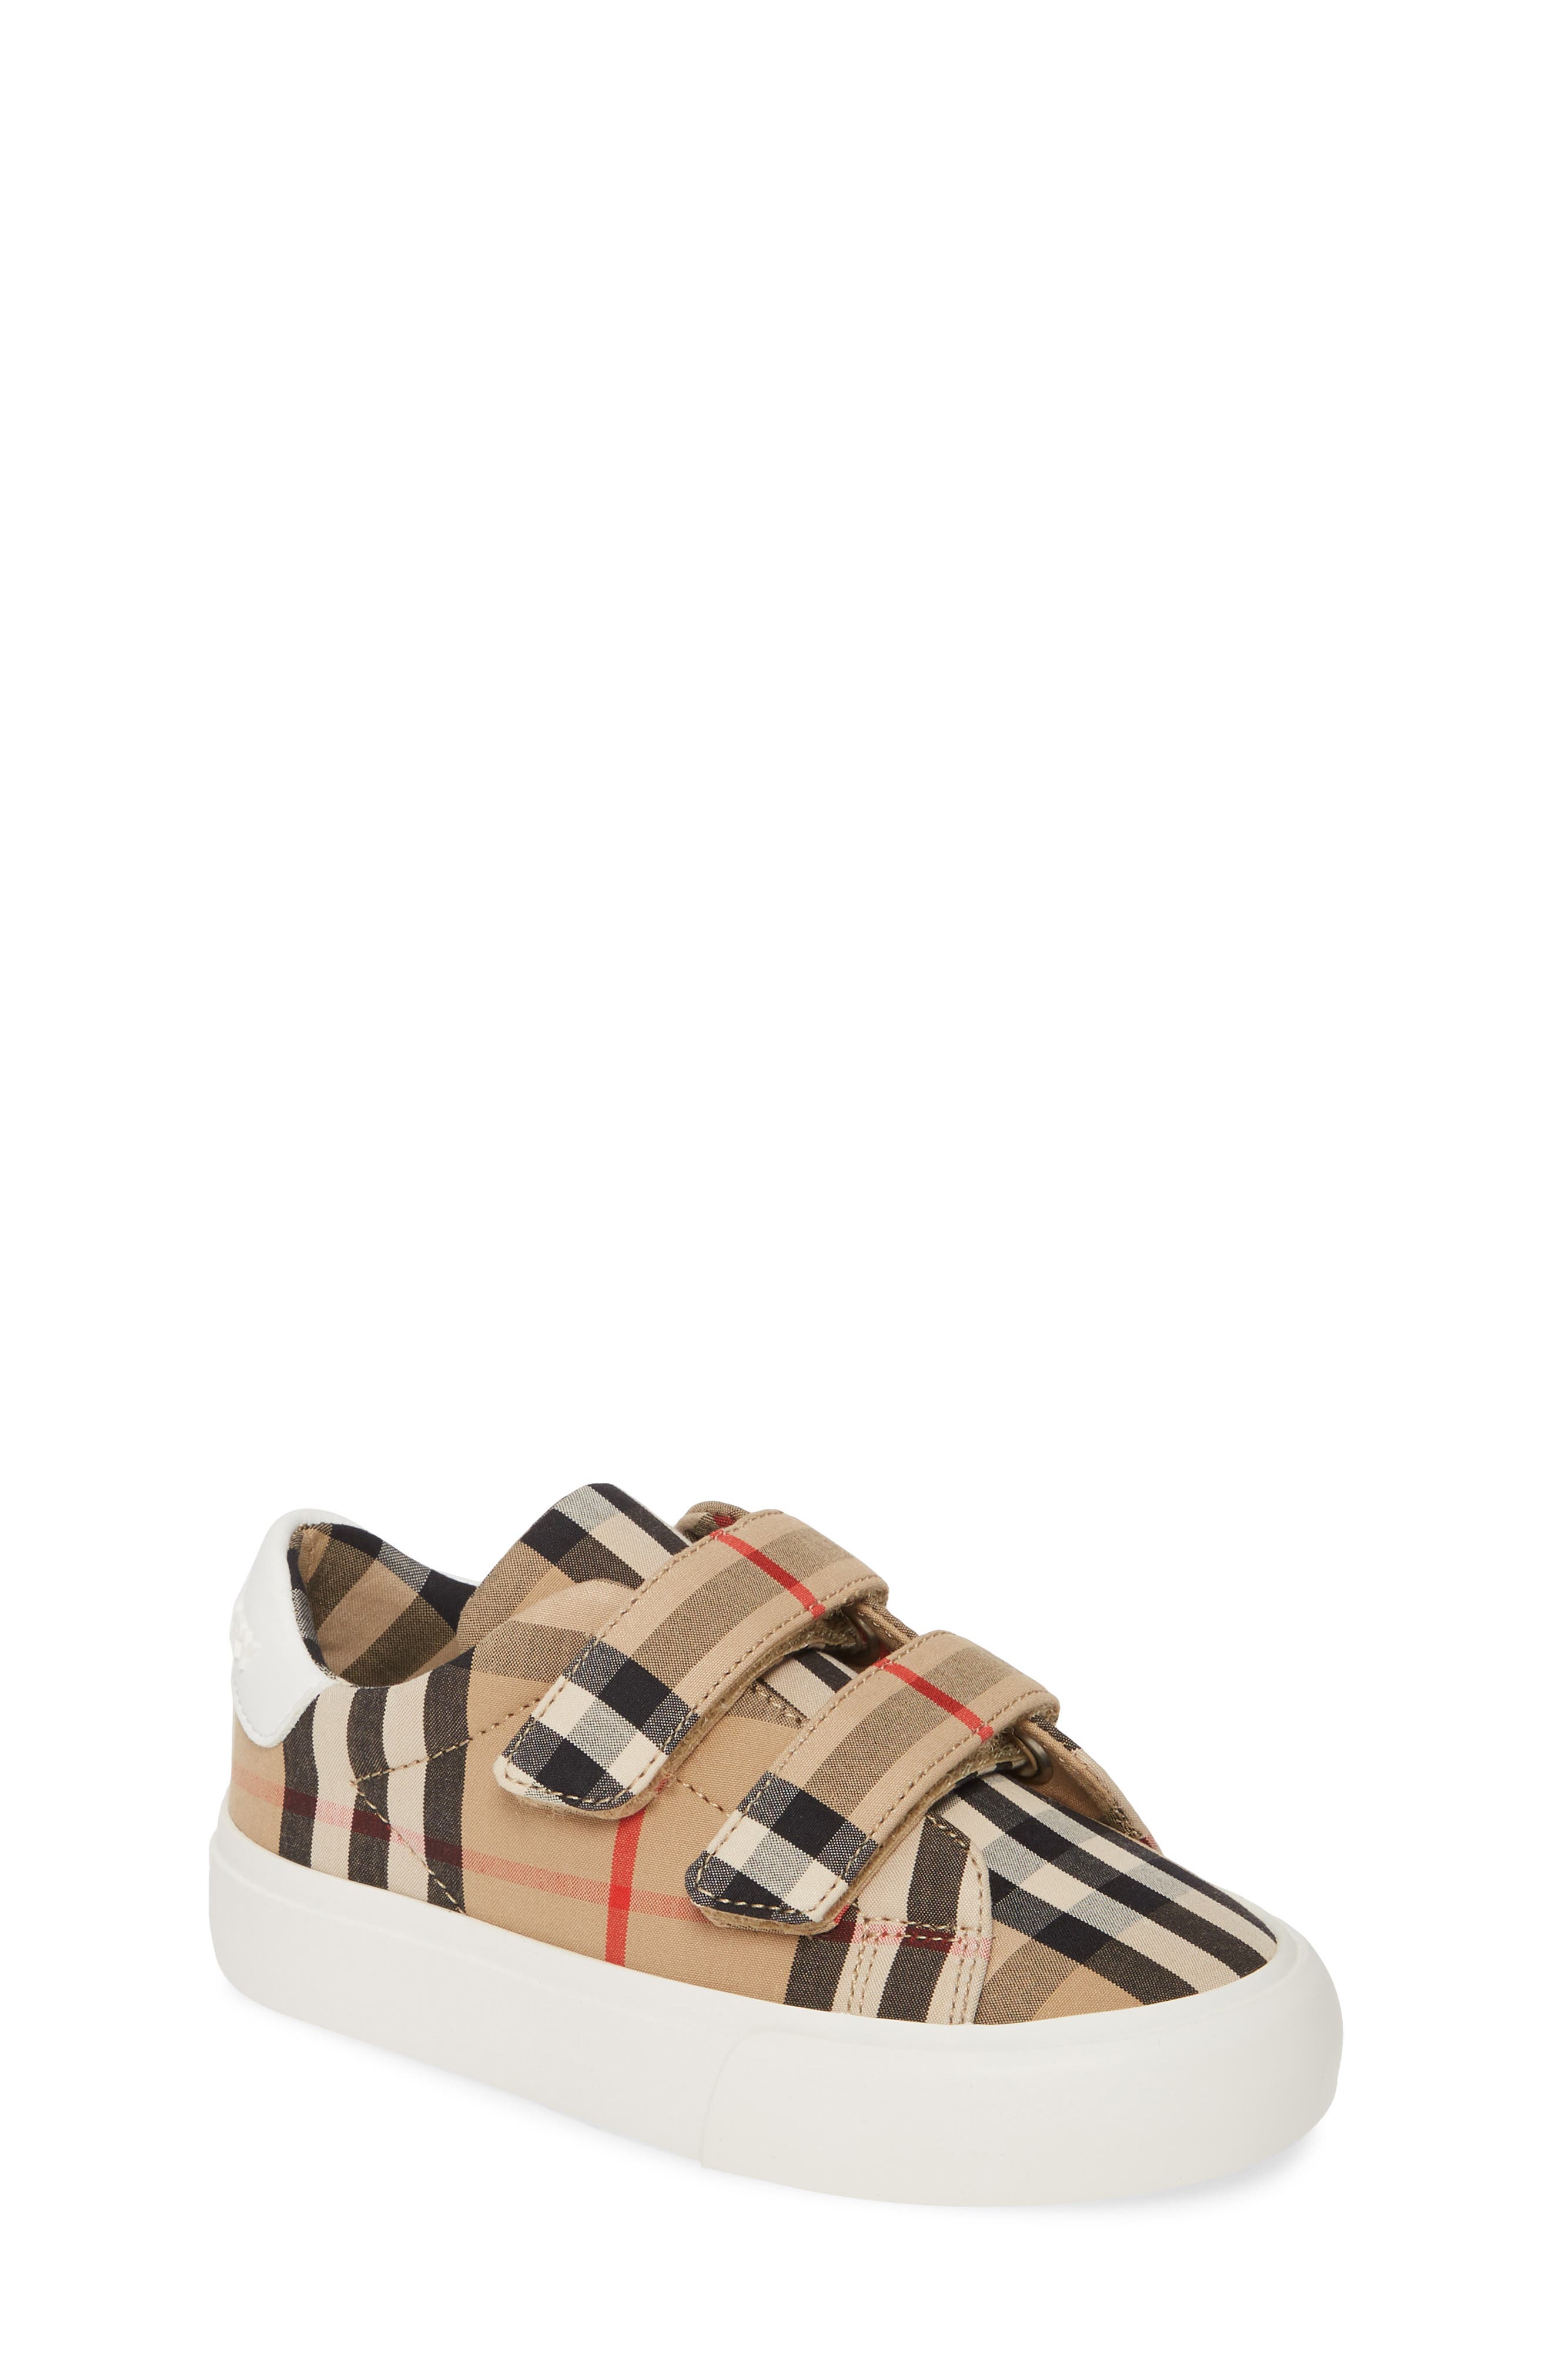 burberry toddler shoes